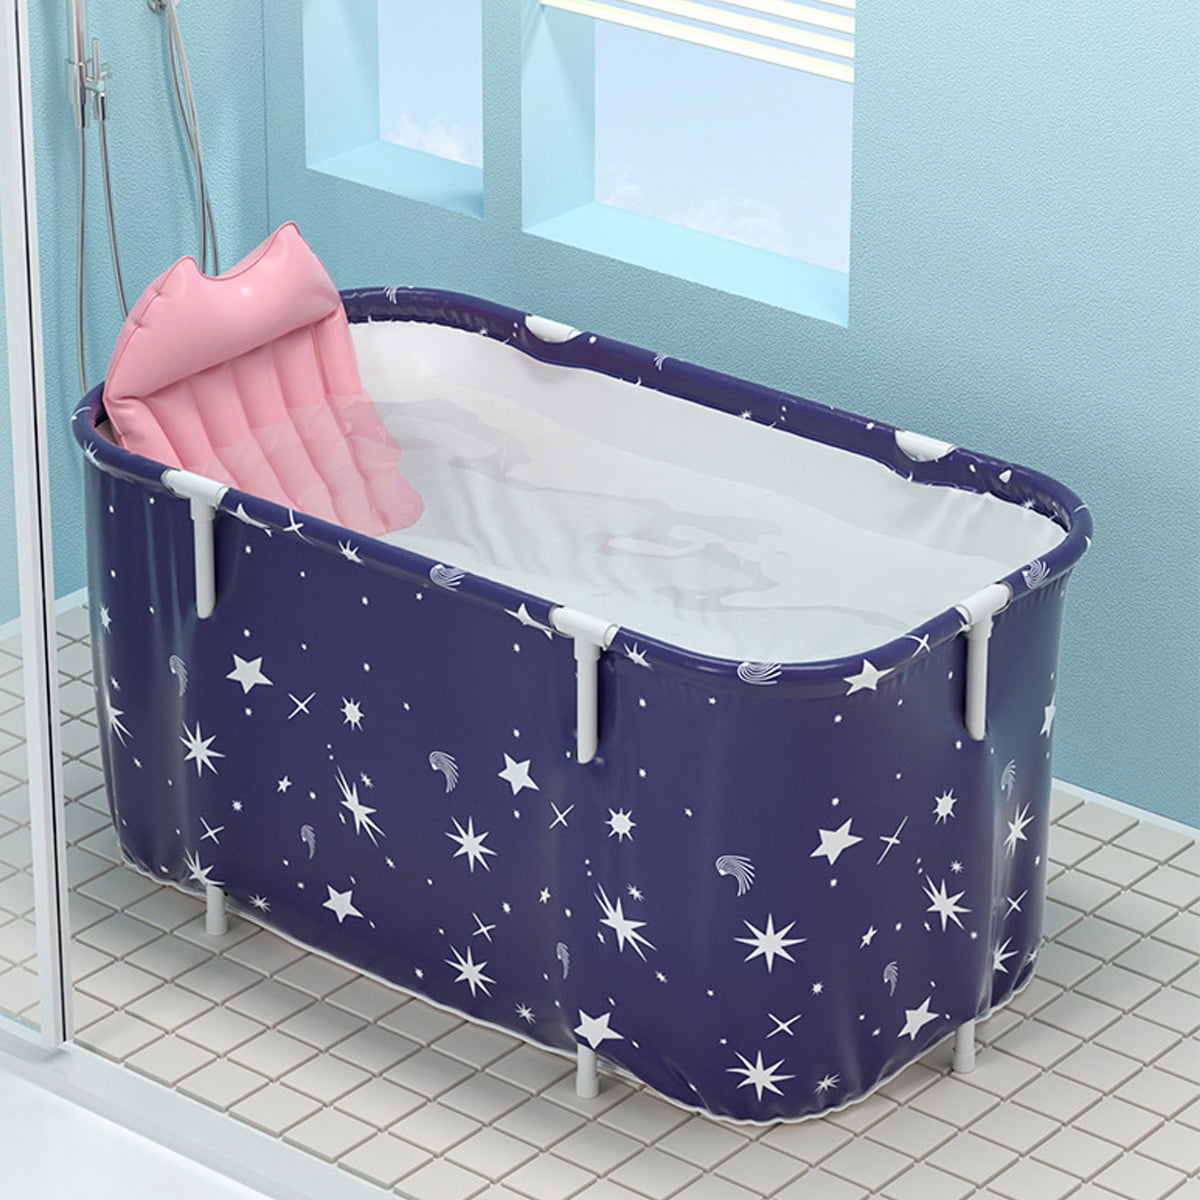 Generic Portable Bathtub Adult Foldable Ice Bath Tub Separate Family Bathroom SPA Tub Soaking Standing Tub Portable Shower Stall Efficient Maintenance of Temperature Ideal for Hot Bath Cold Tub PINK